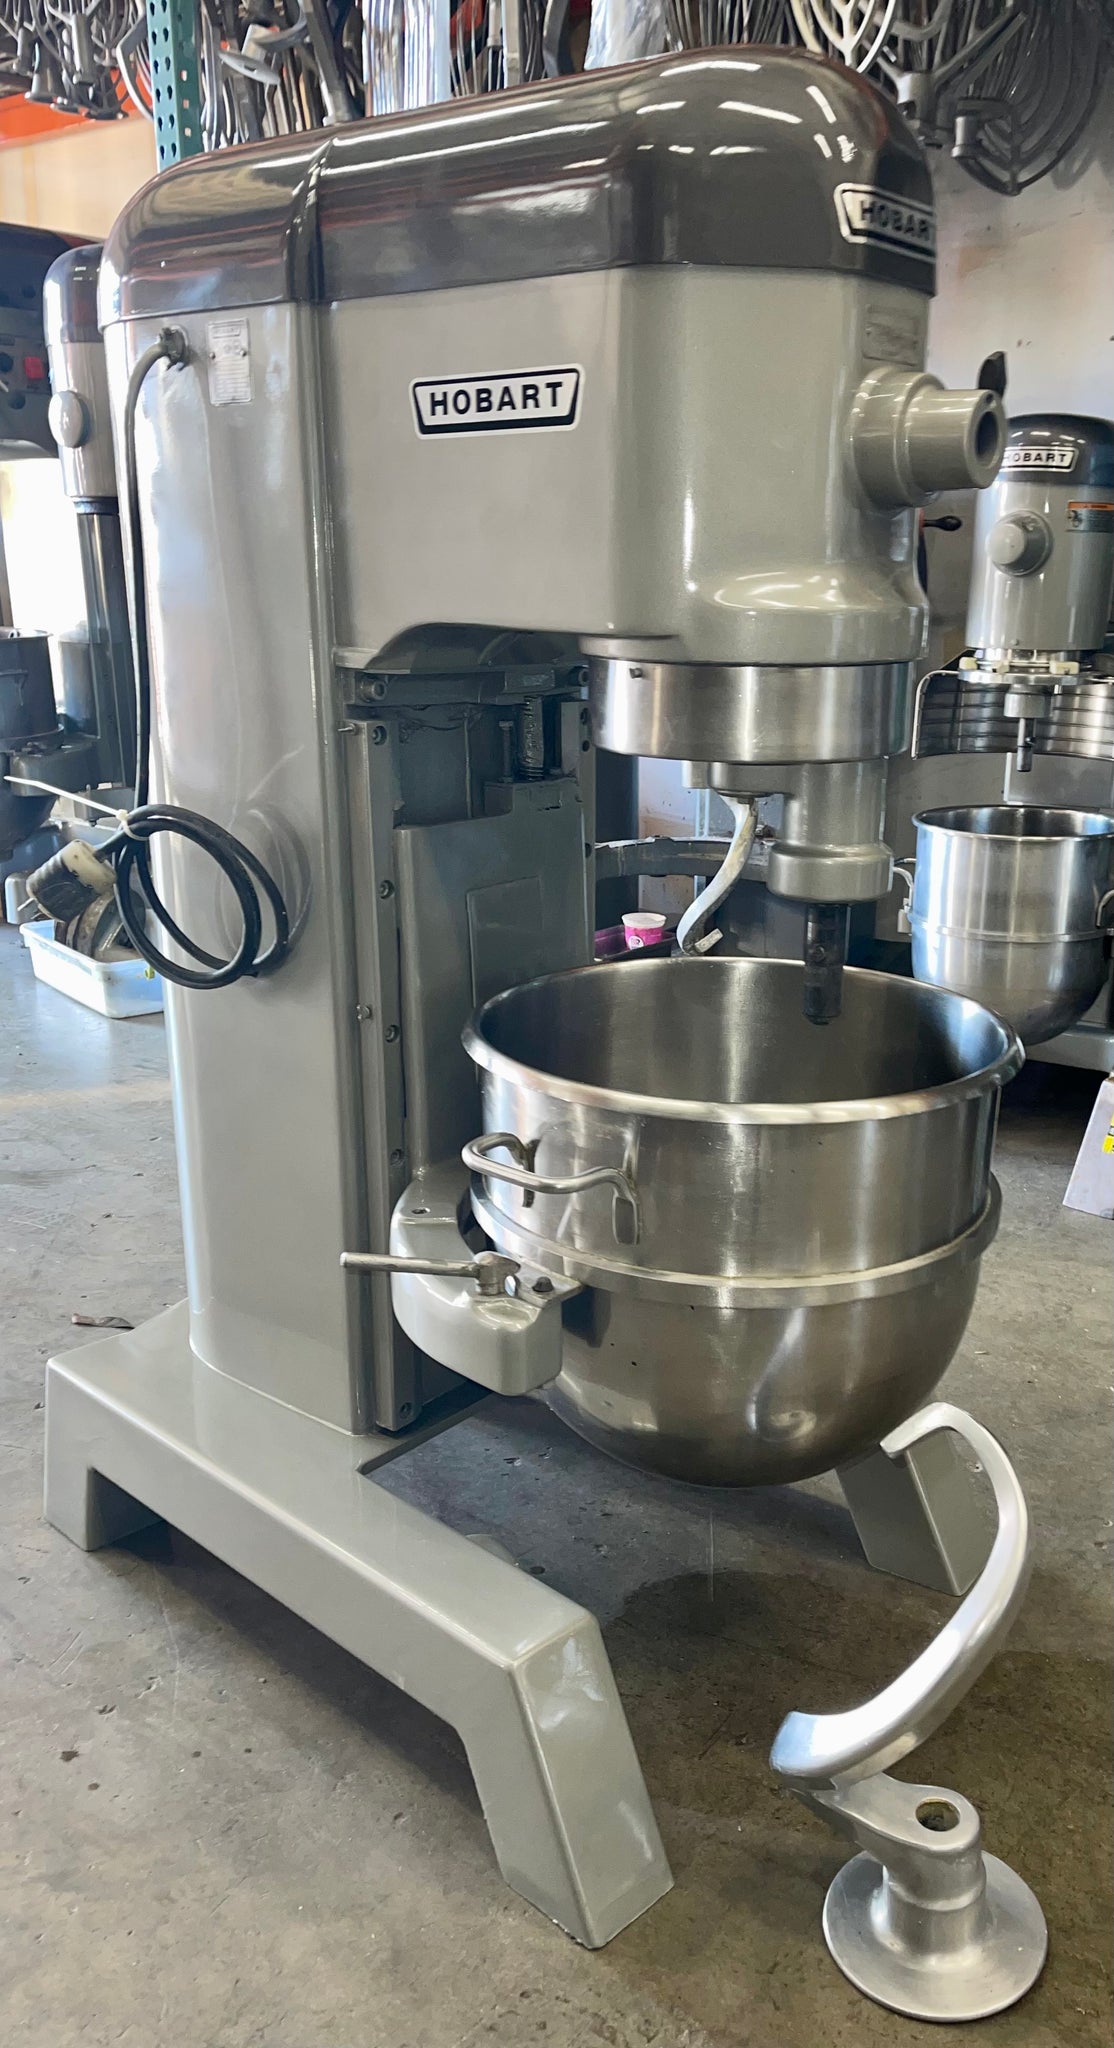 Hobart H600t 60 quart mixer w timer 1 phase 2 HP comes with stainless steel bowl and one attachment